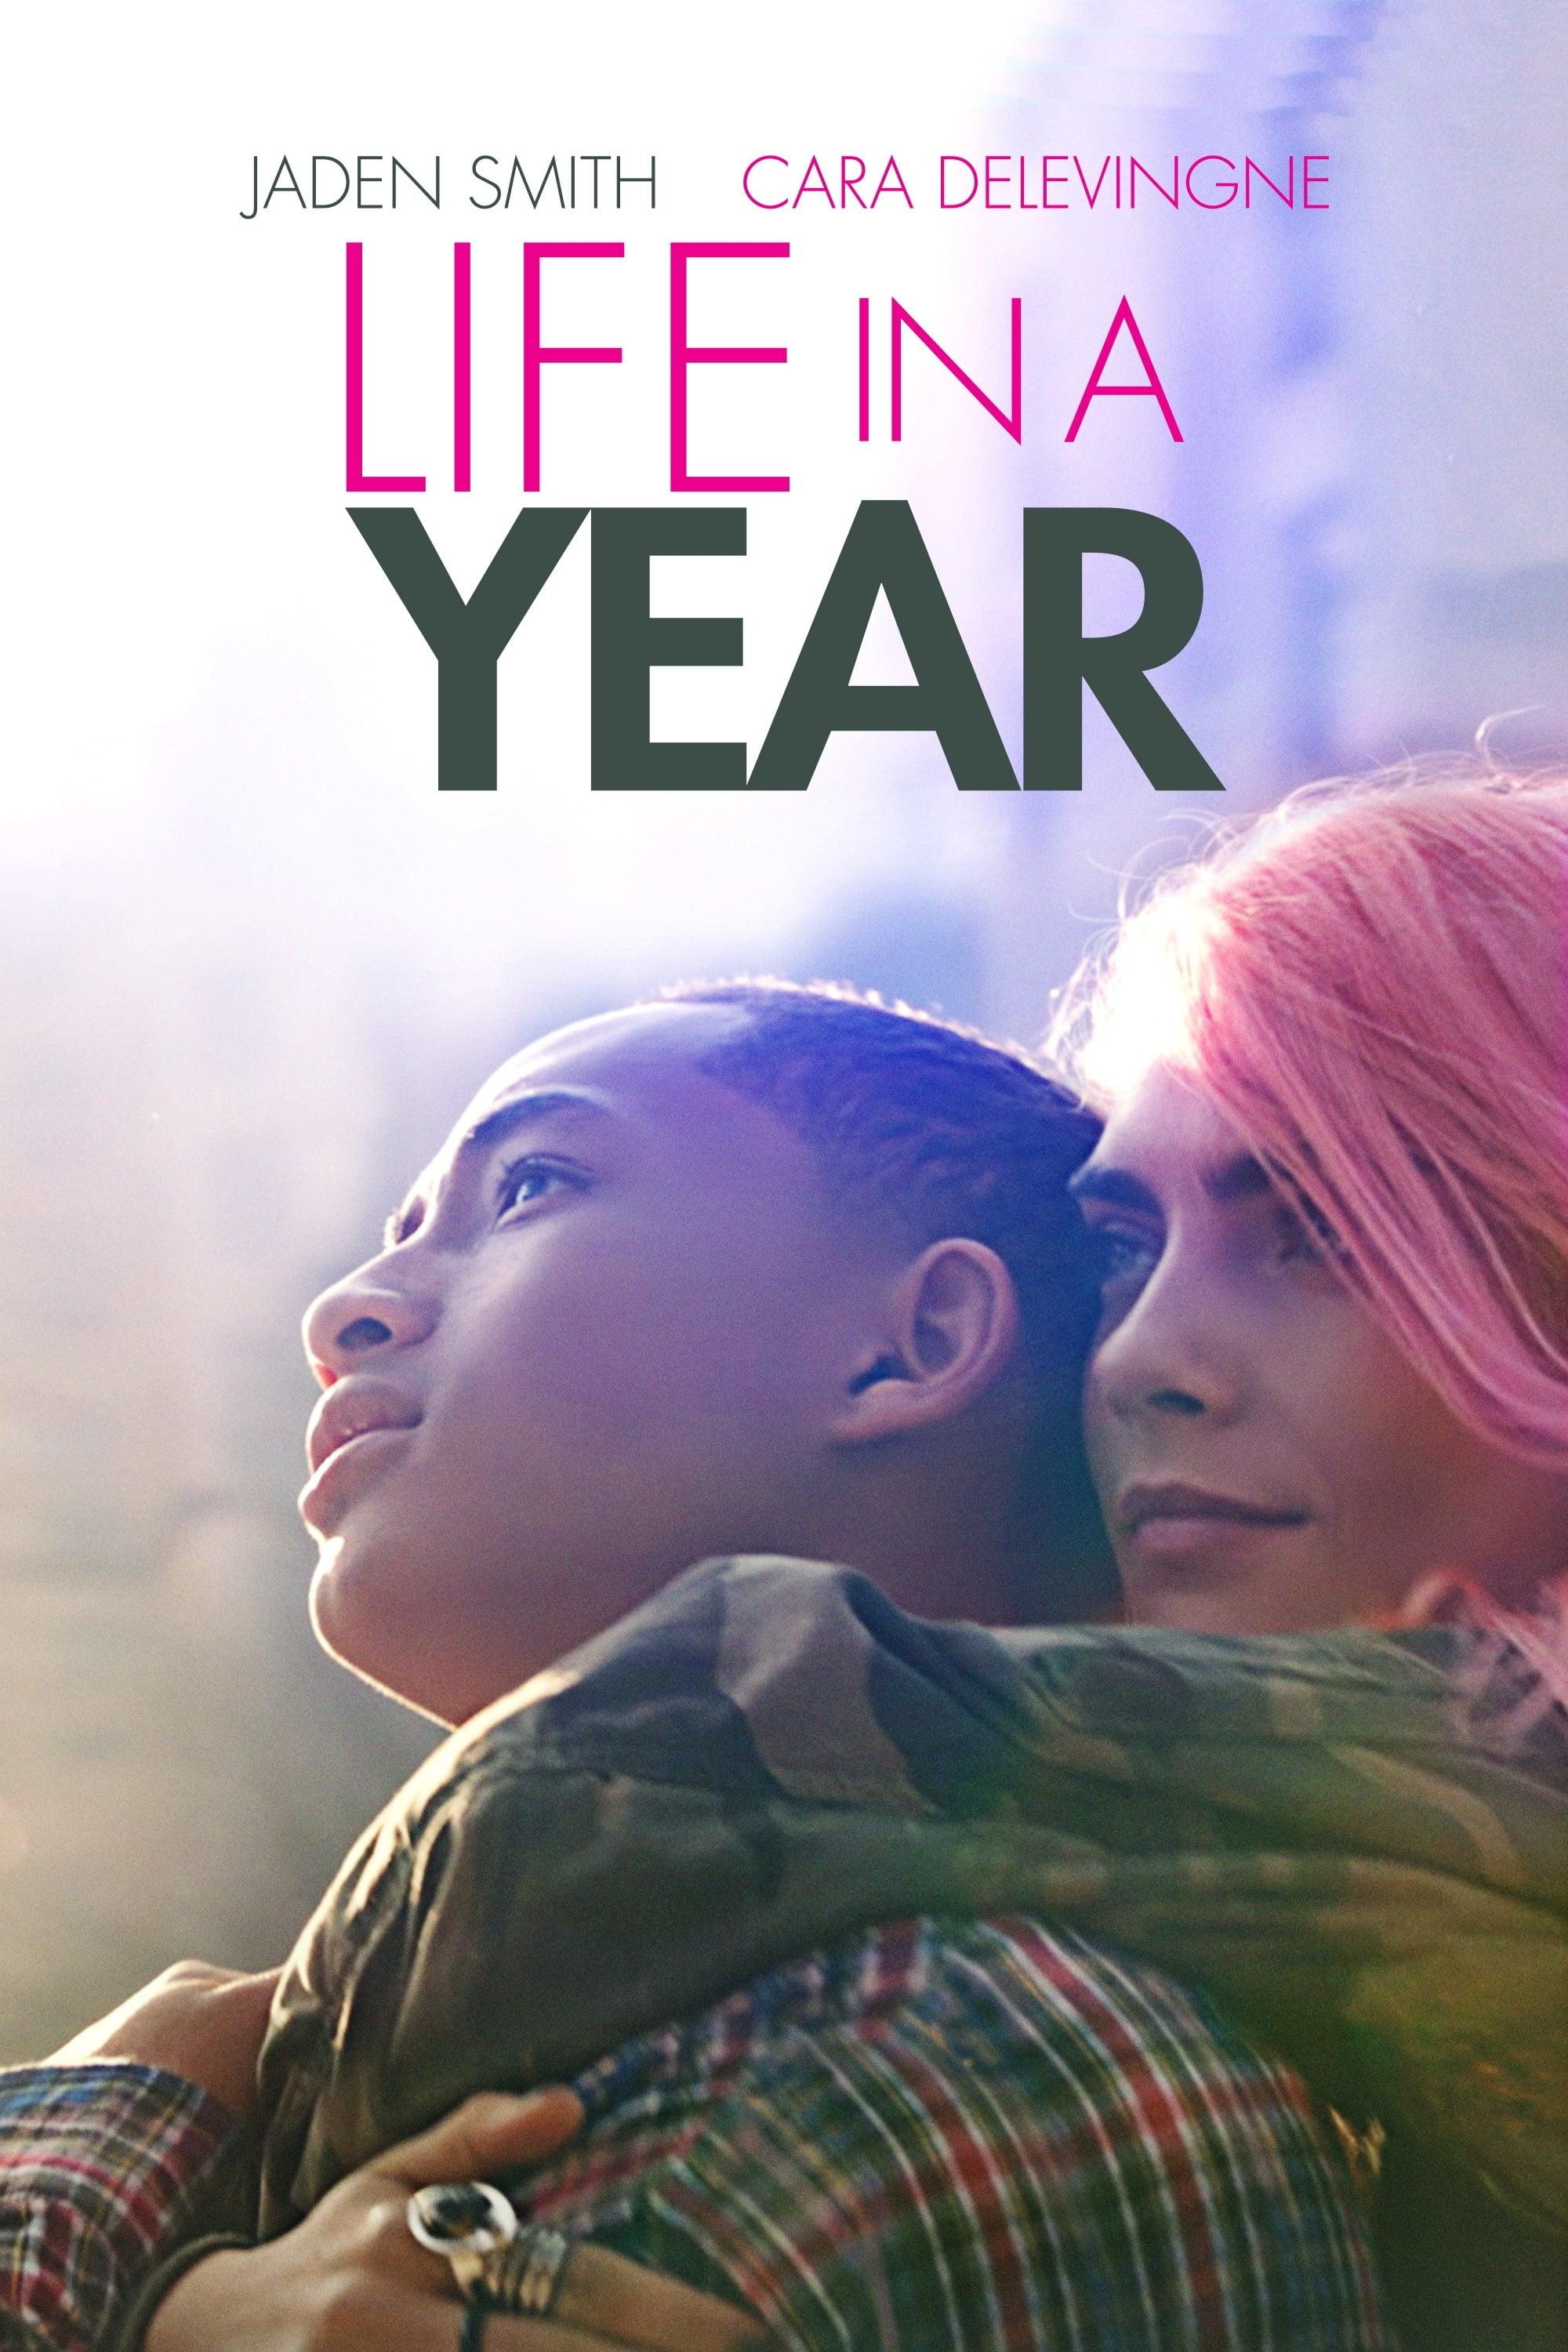 Life in a Year poster